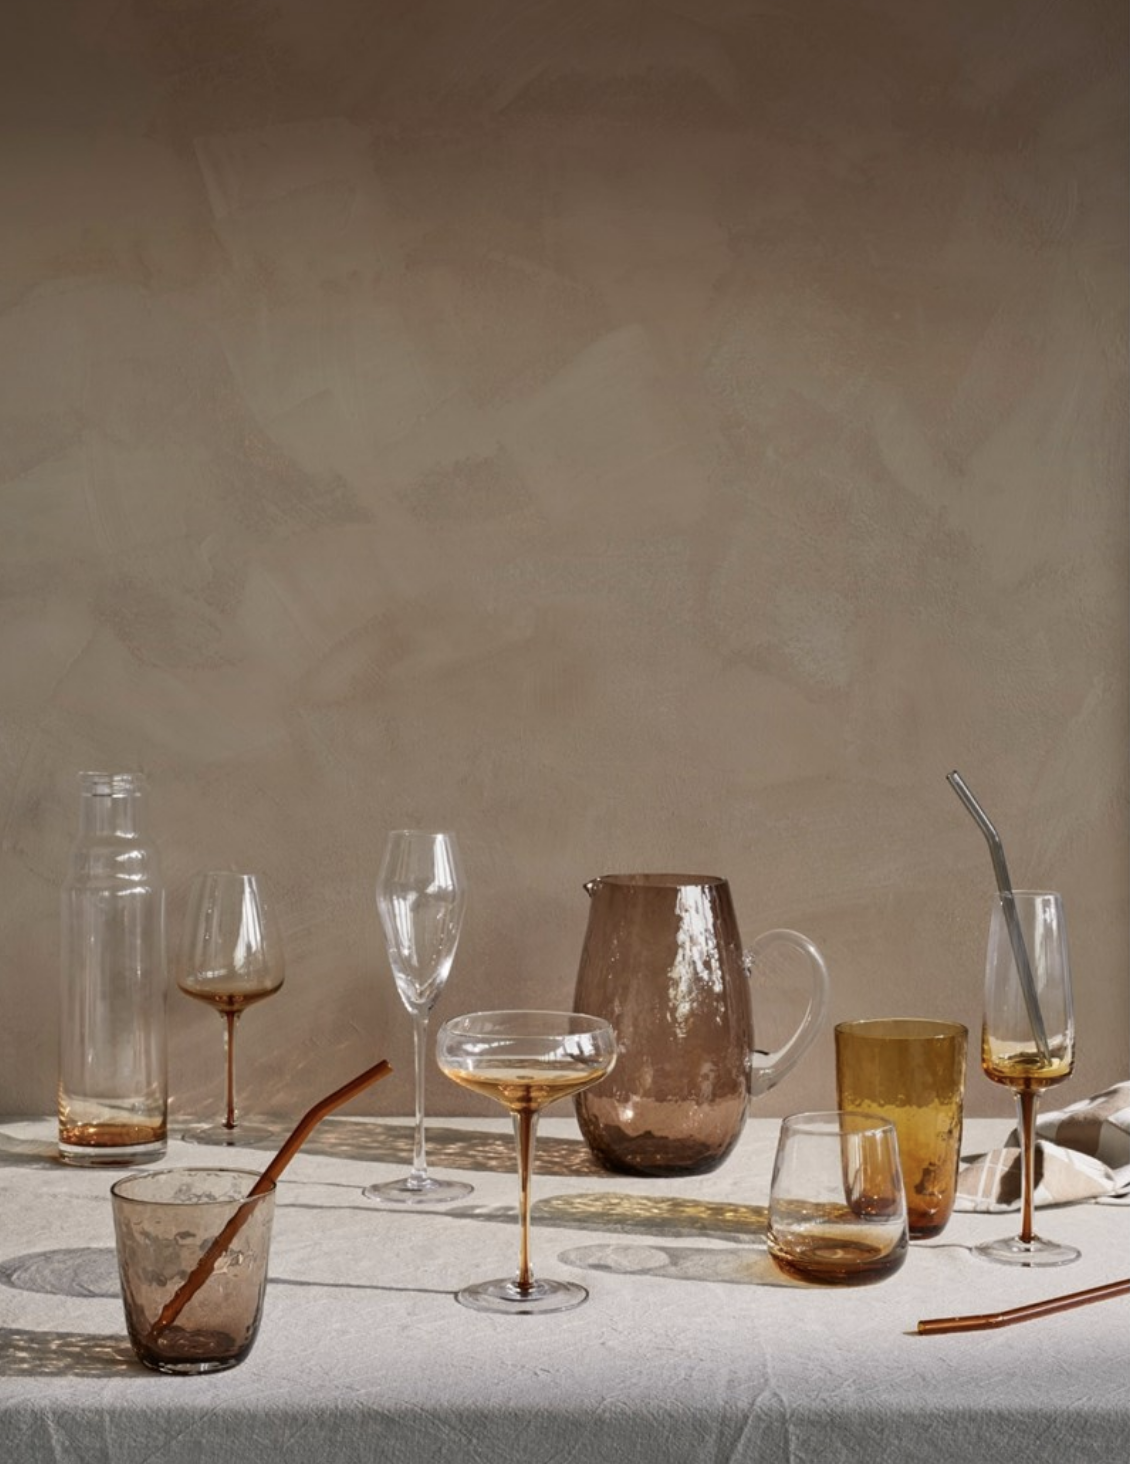   White Wine Glass Amber  , Champagne Glass Amber ,  Cocktail Glass Amber ,  Tumbler Glass Amber ,  Carafe with Lid Amber,    Jug Hammered,   Tumbler Hammered , and  Champagne Glass Sandvig  all created by  Broste Copenhagen.   